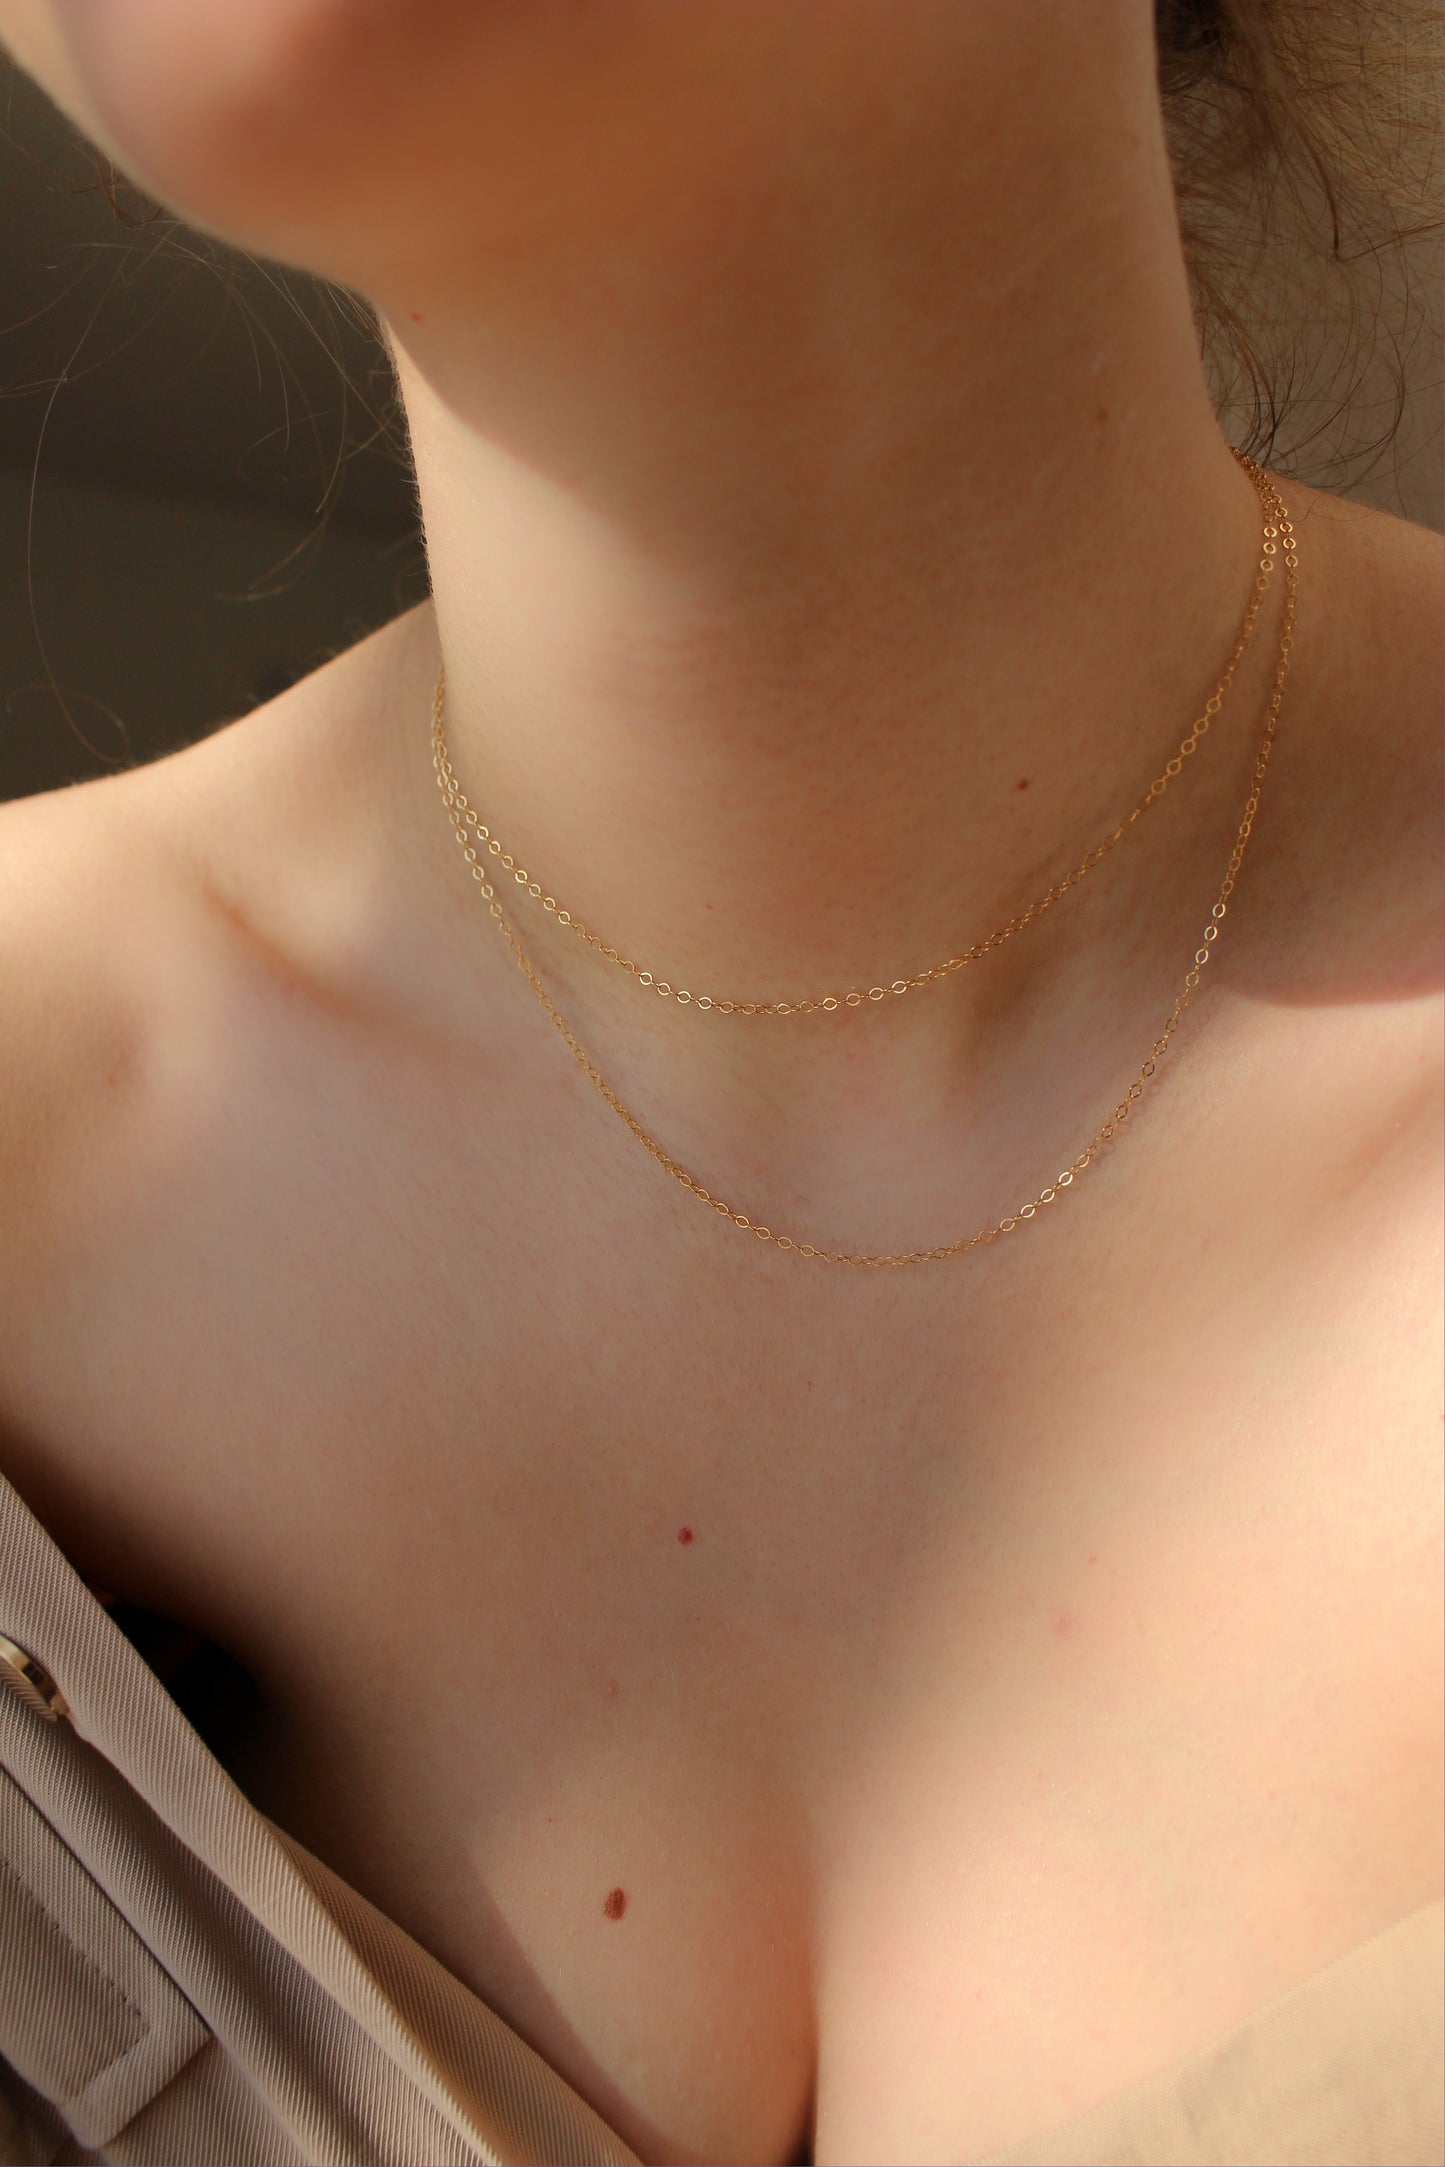 Set of 2 flat cable chains in 14k gold filled ∙ Basic Thin Chain ∙ Layered Necklace ∙ Choker necklace ∙ Minimalist dainty two necklaces